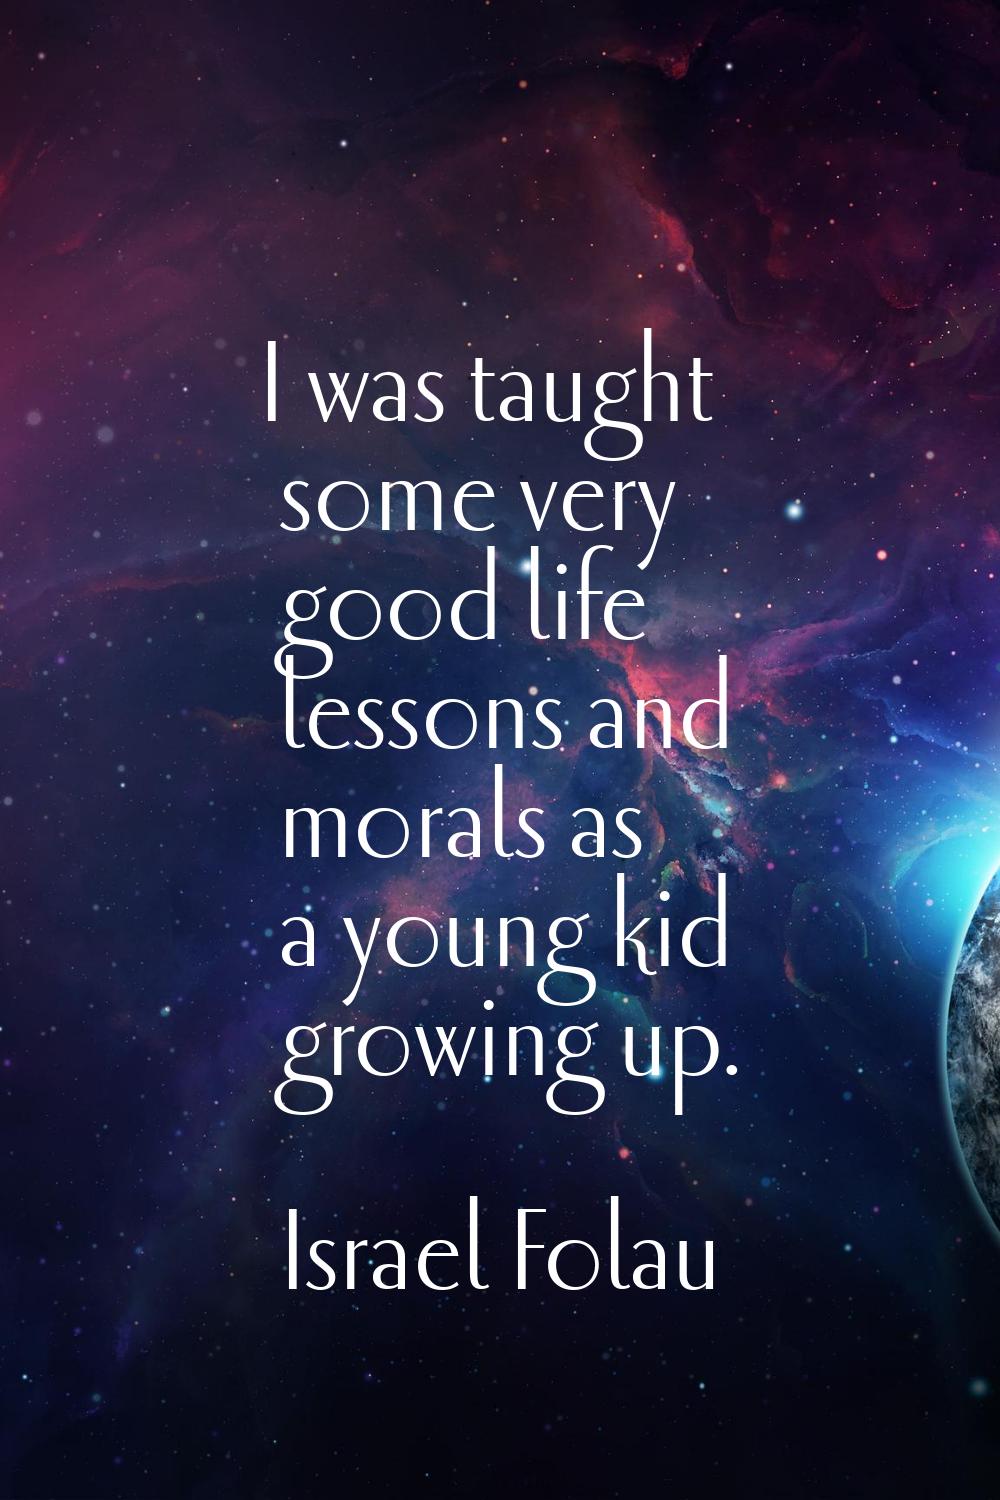 I was taught some very good life lessons and morals as a young kid growing up.